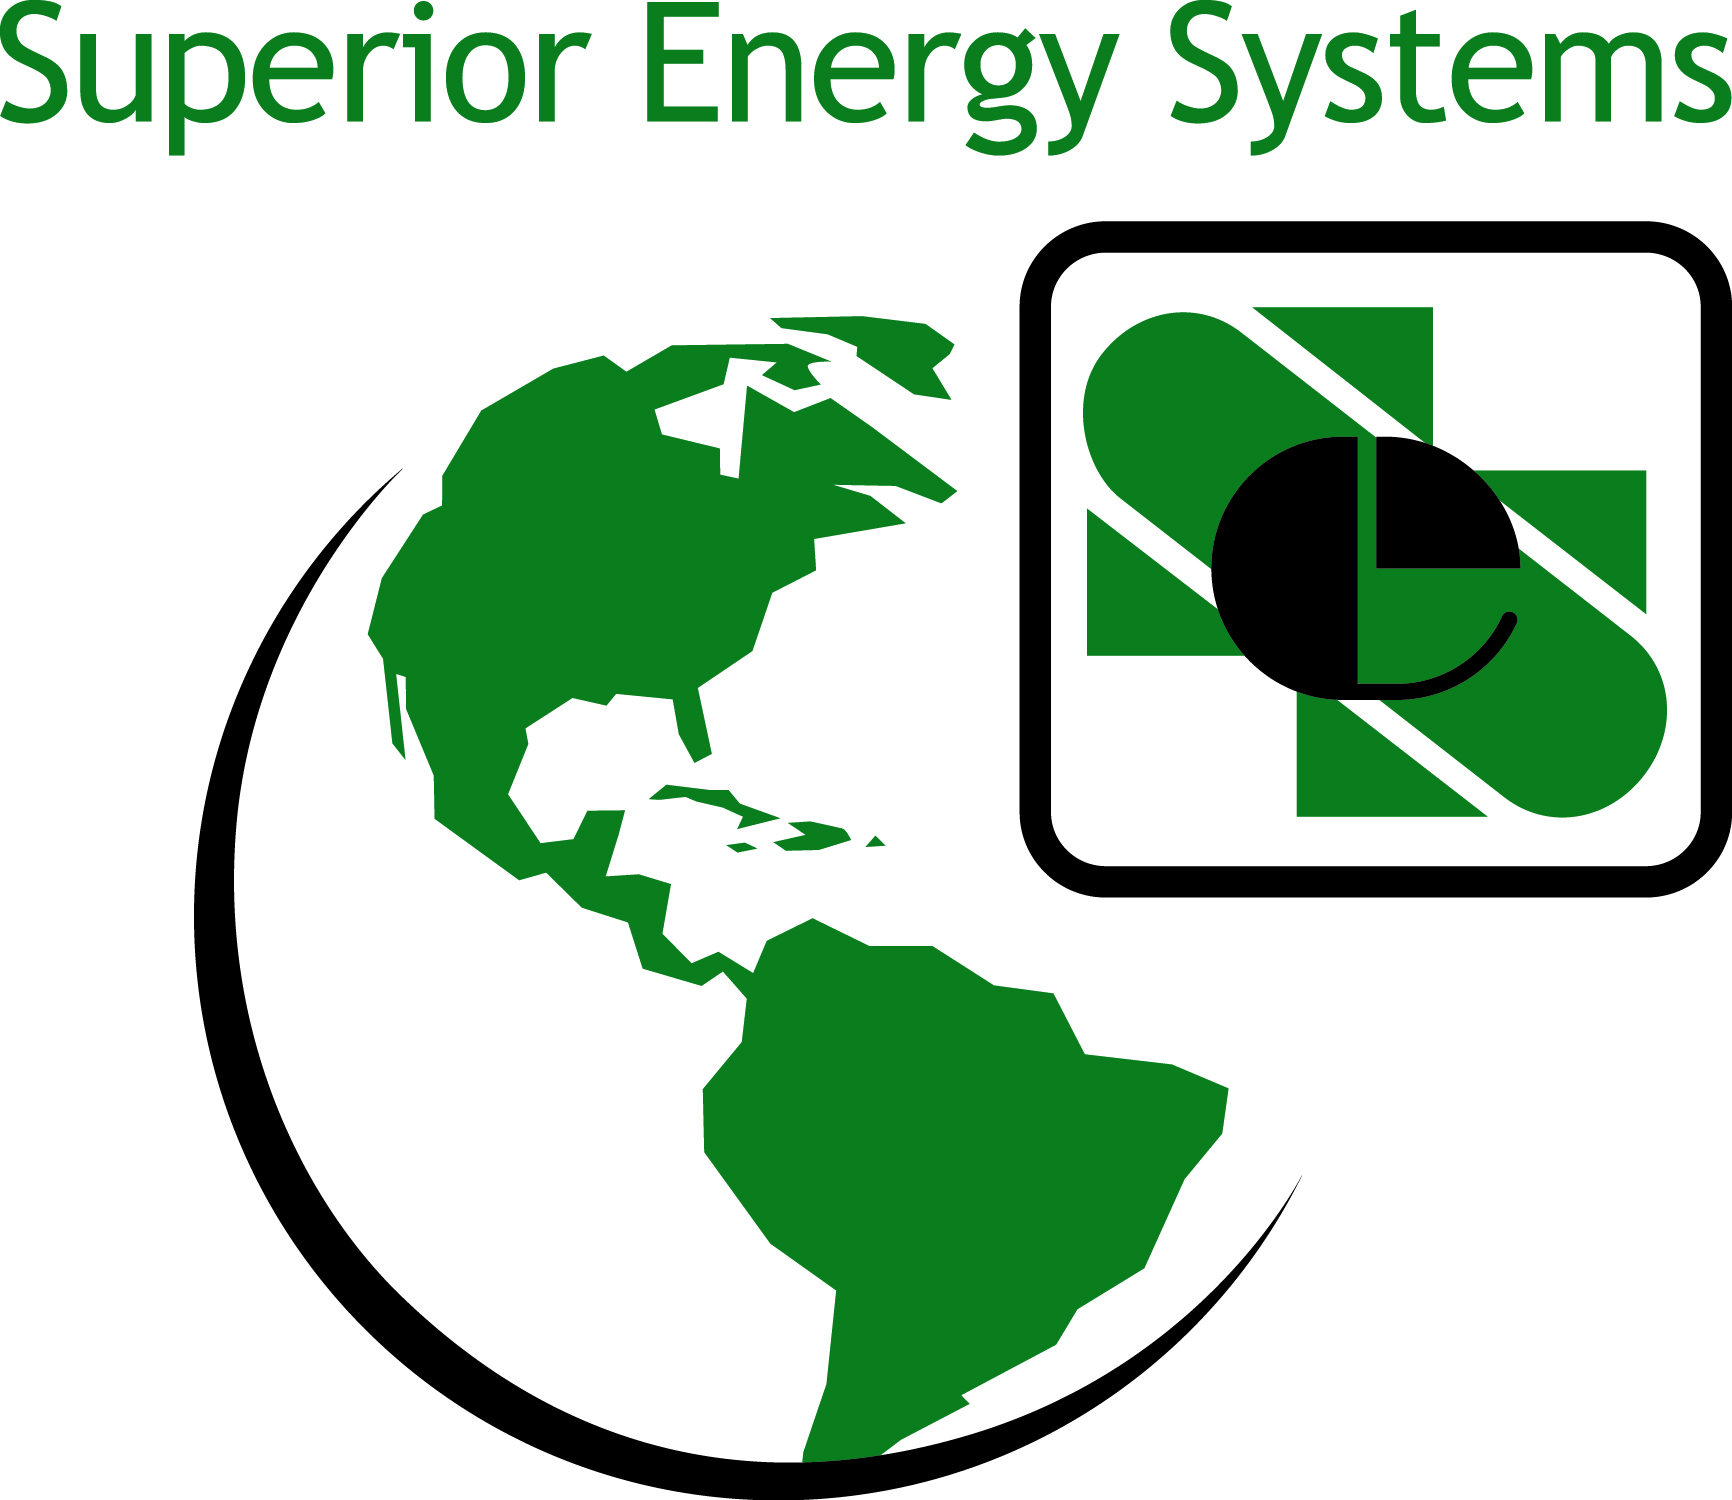 For more than 40 years, Superior Energy Systems has supplied propane infrastructure and services, bringing together engineering, manufacturing and construction expertise while focusing on operational